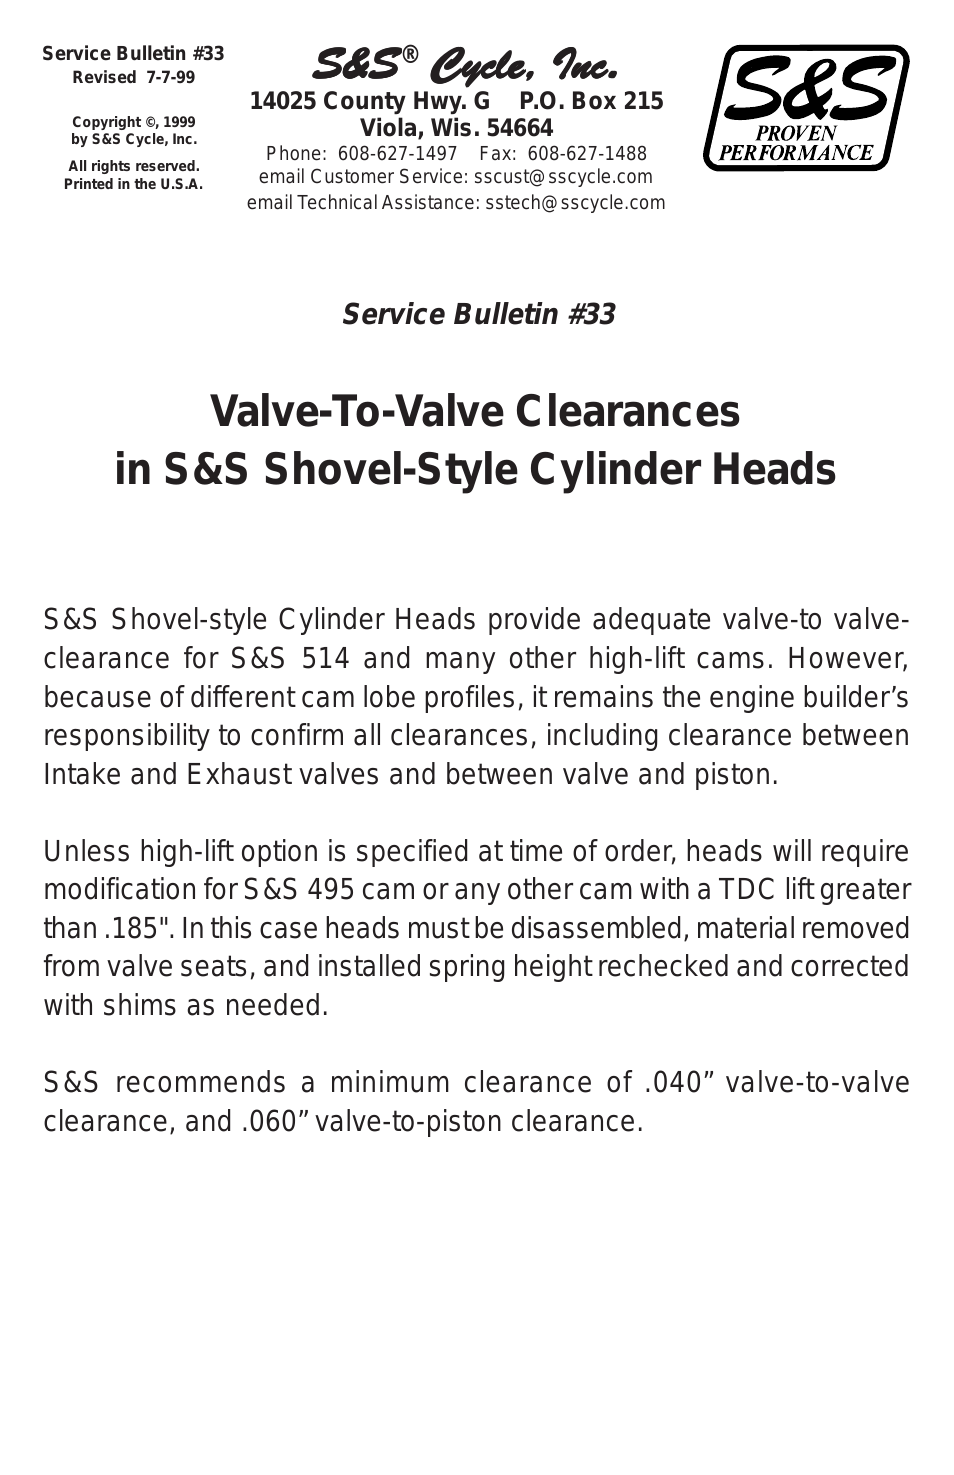 Valve-To-Valve Clearances in S&S Shovel-Style Cylinder Heads